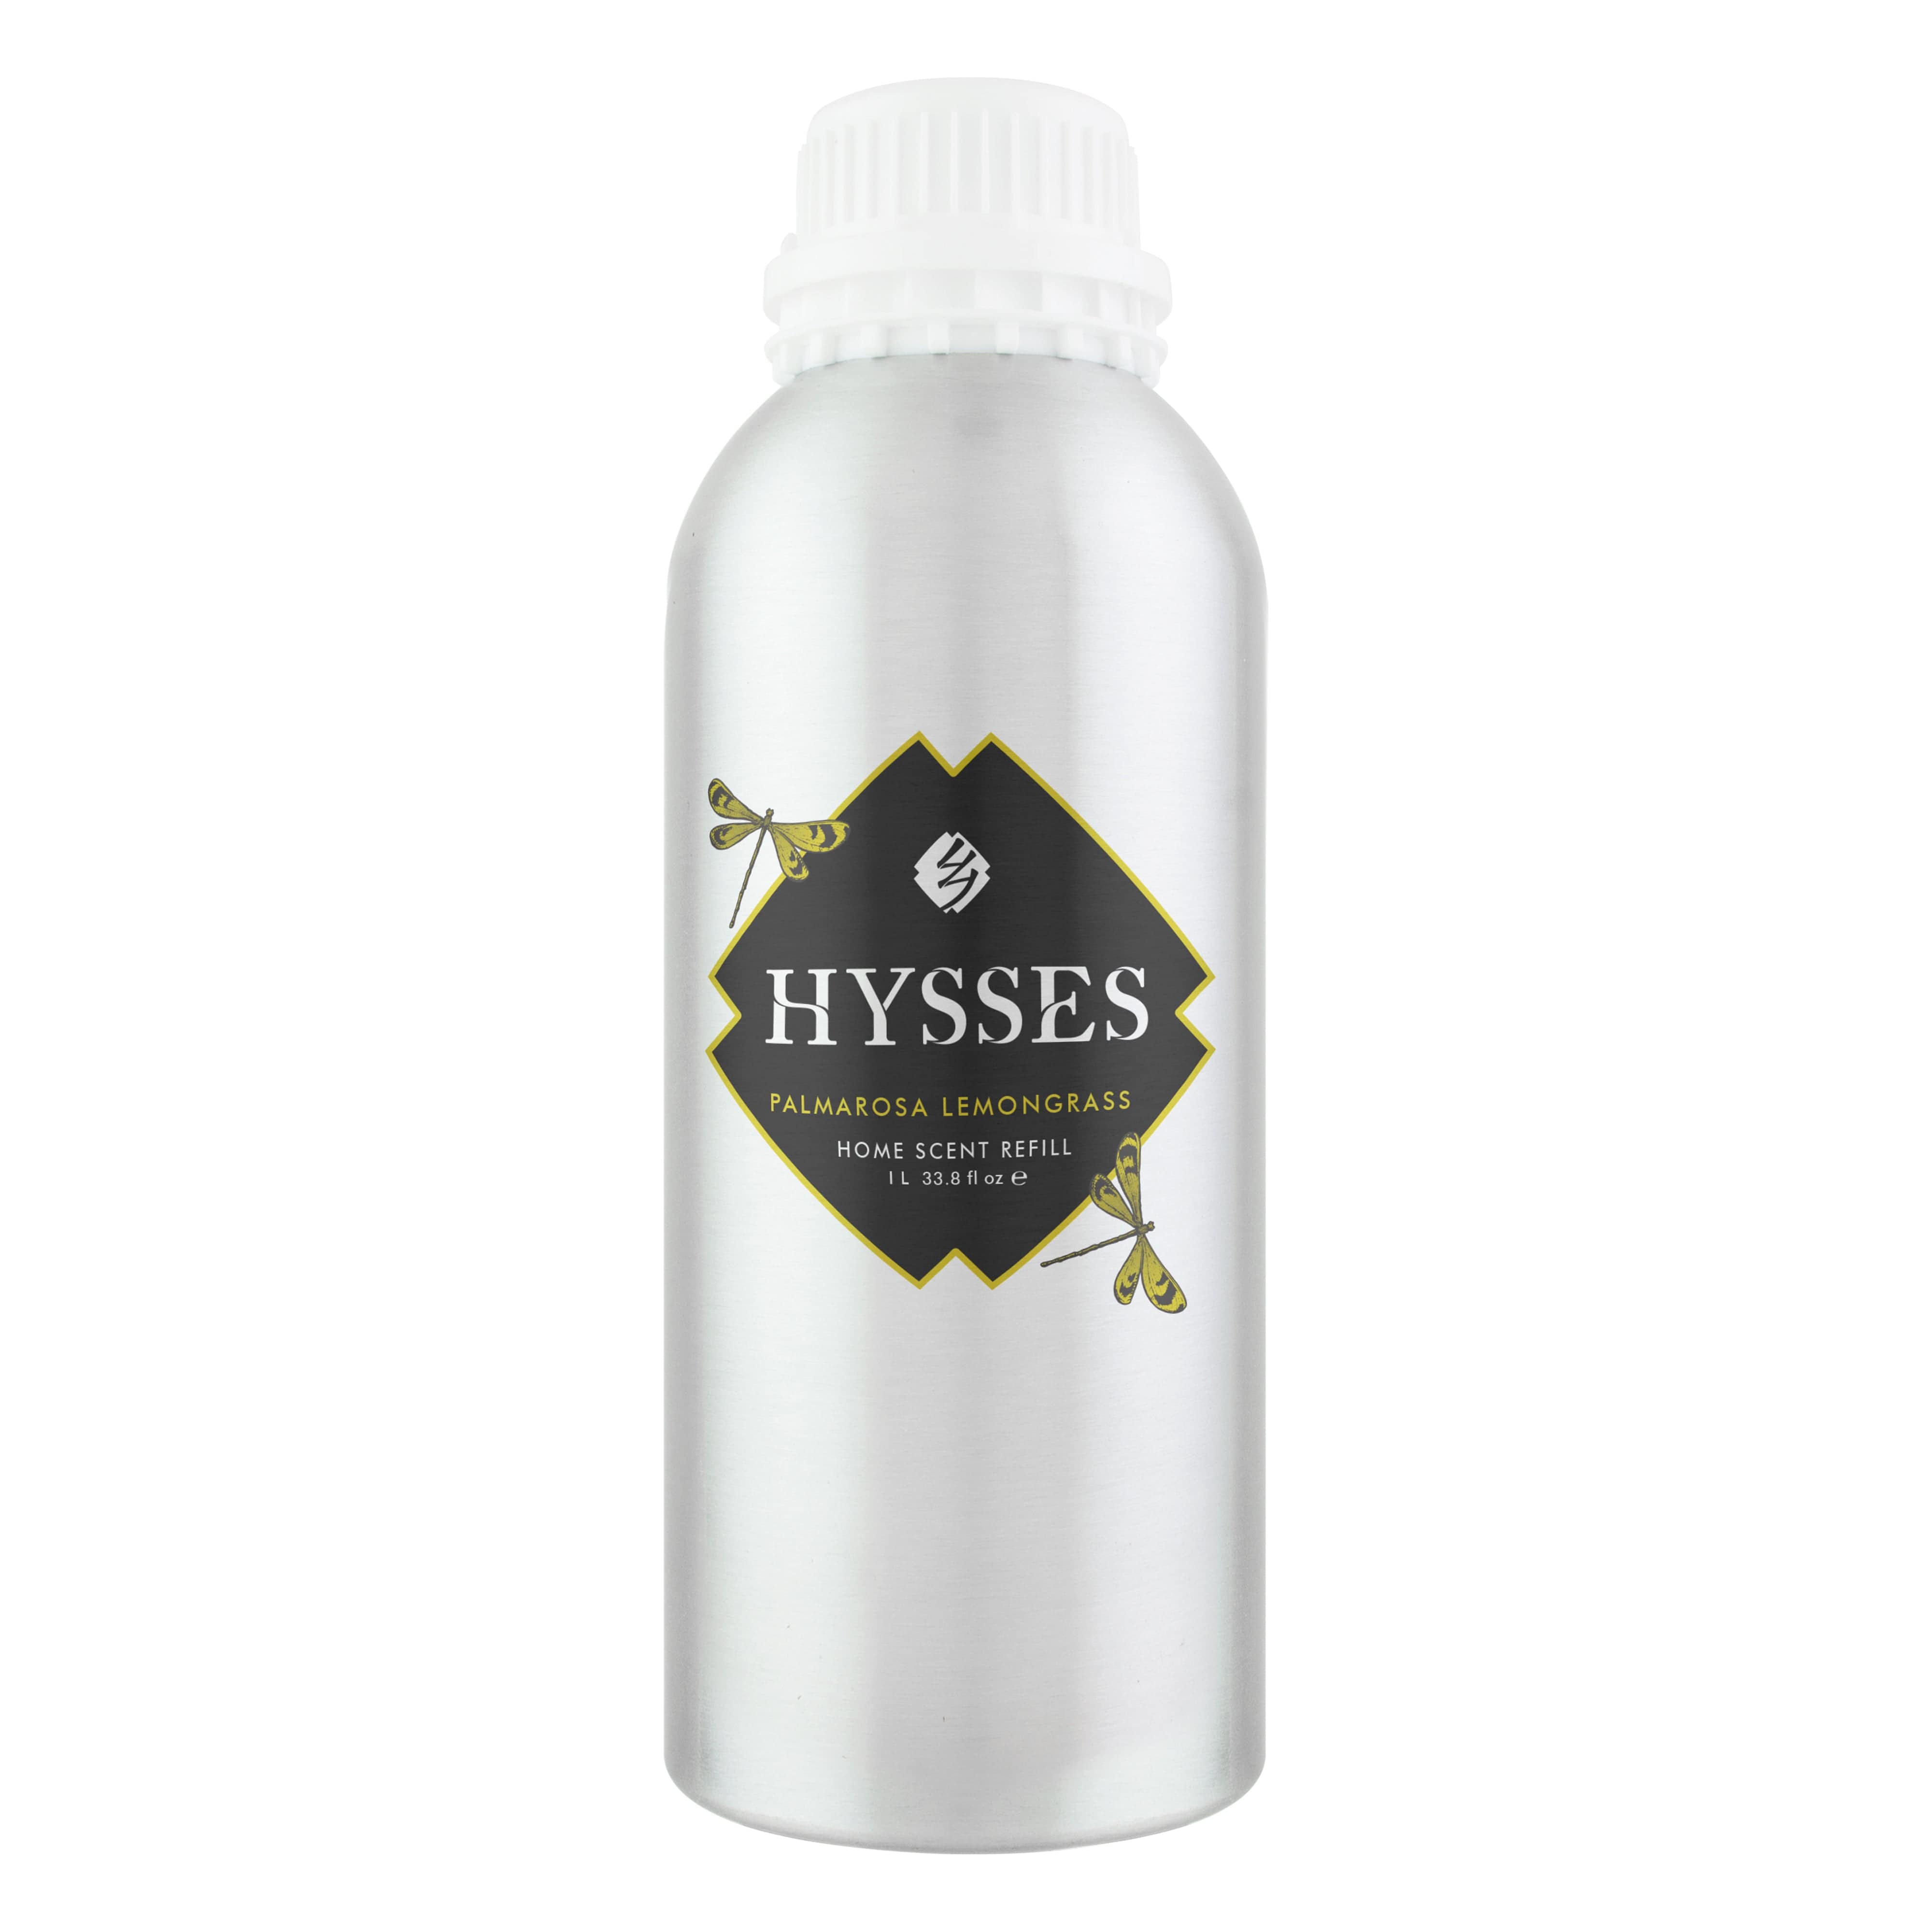 Hysses Home Scents 1000ml Refill Home Scent Reed Diffuser Palmarosa Lemongrass